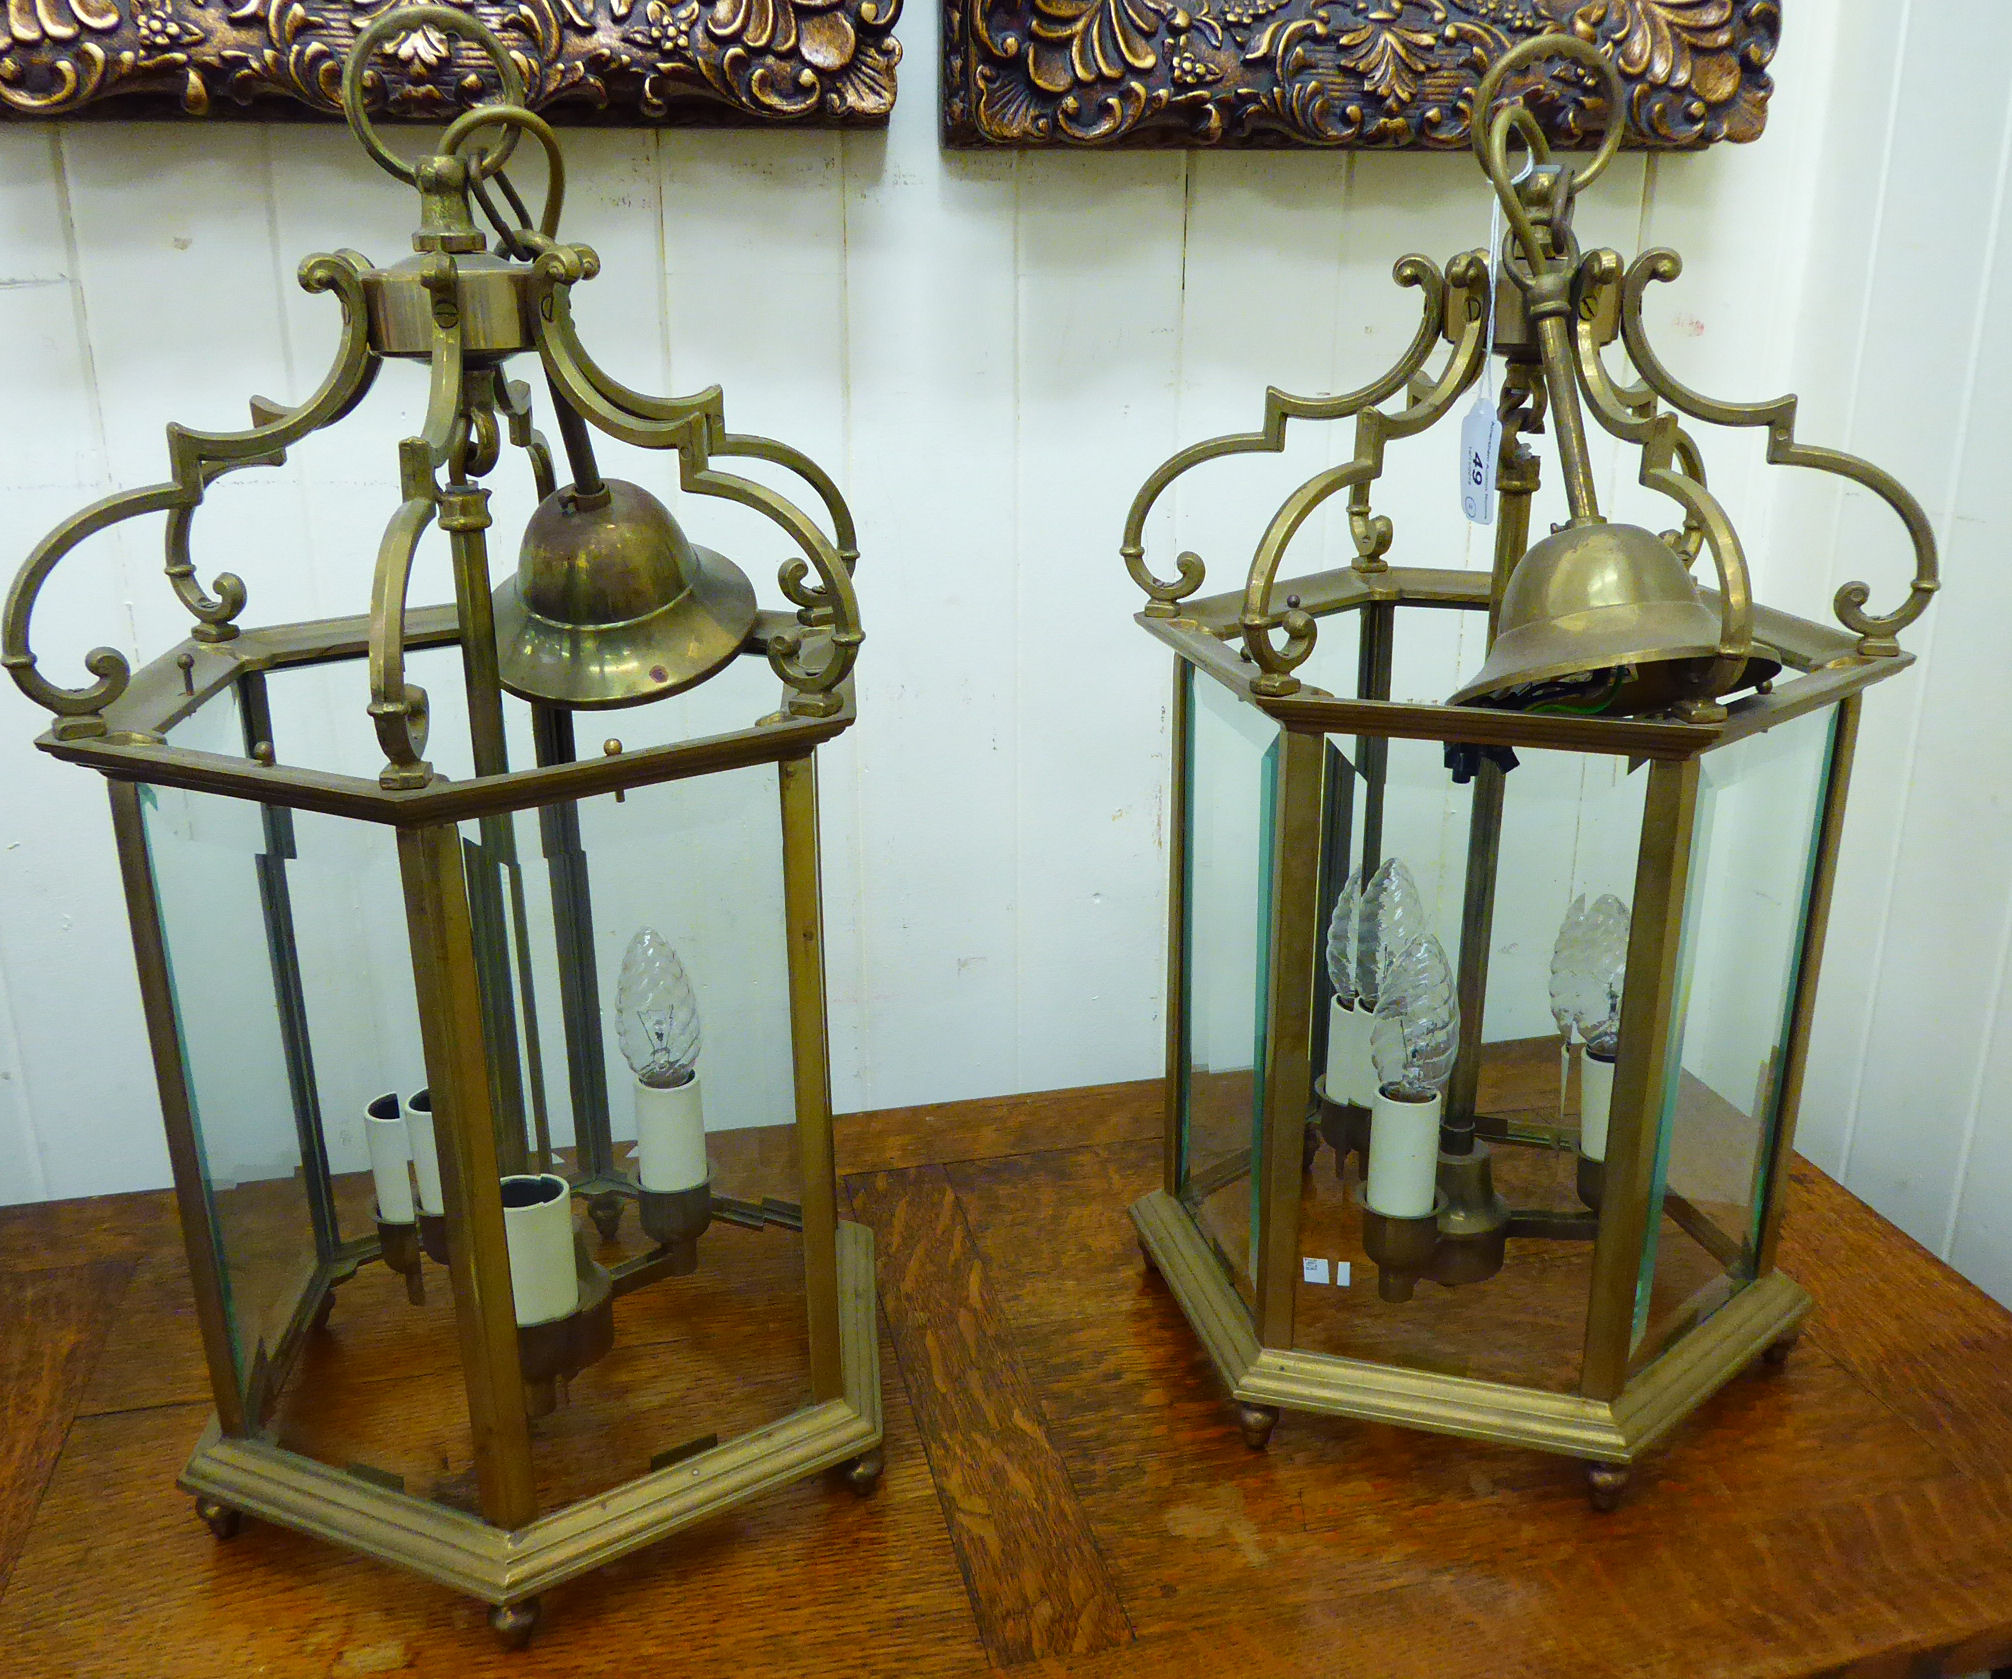 A pair of modern Georgian style lacquered brass framed hexagonal hanging lanterns with glass panels